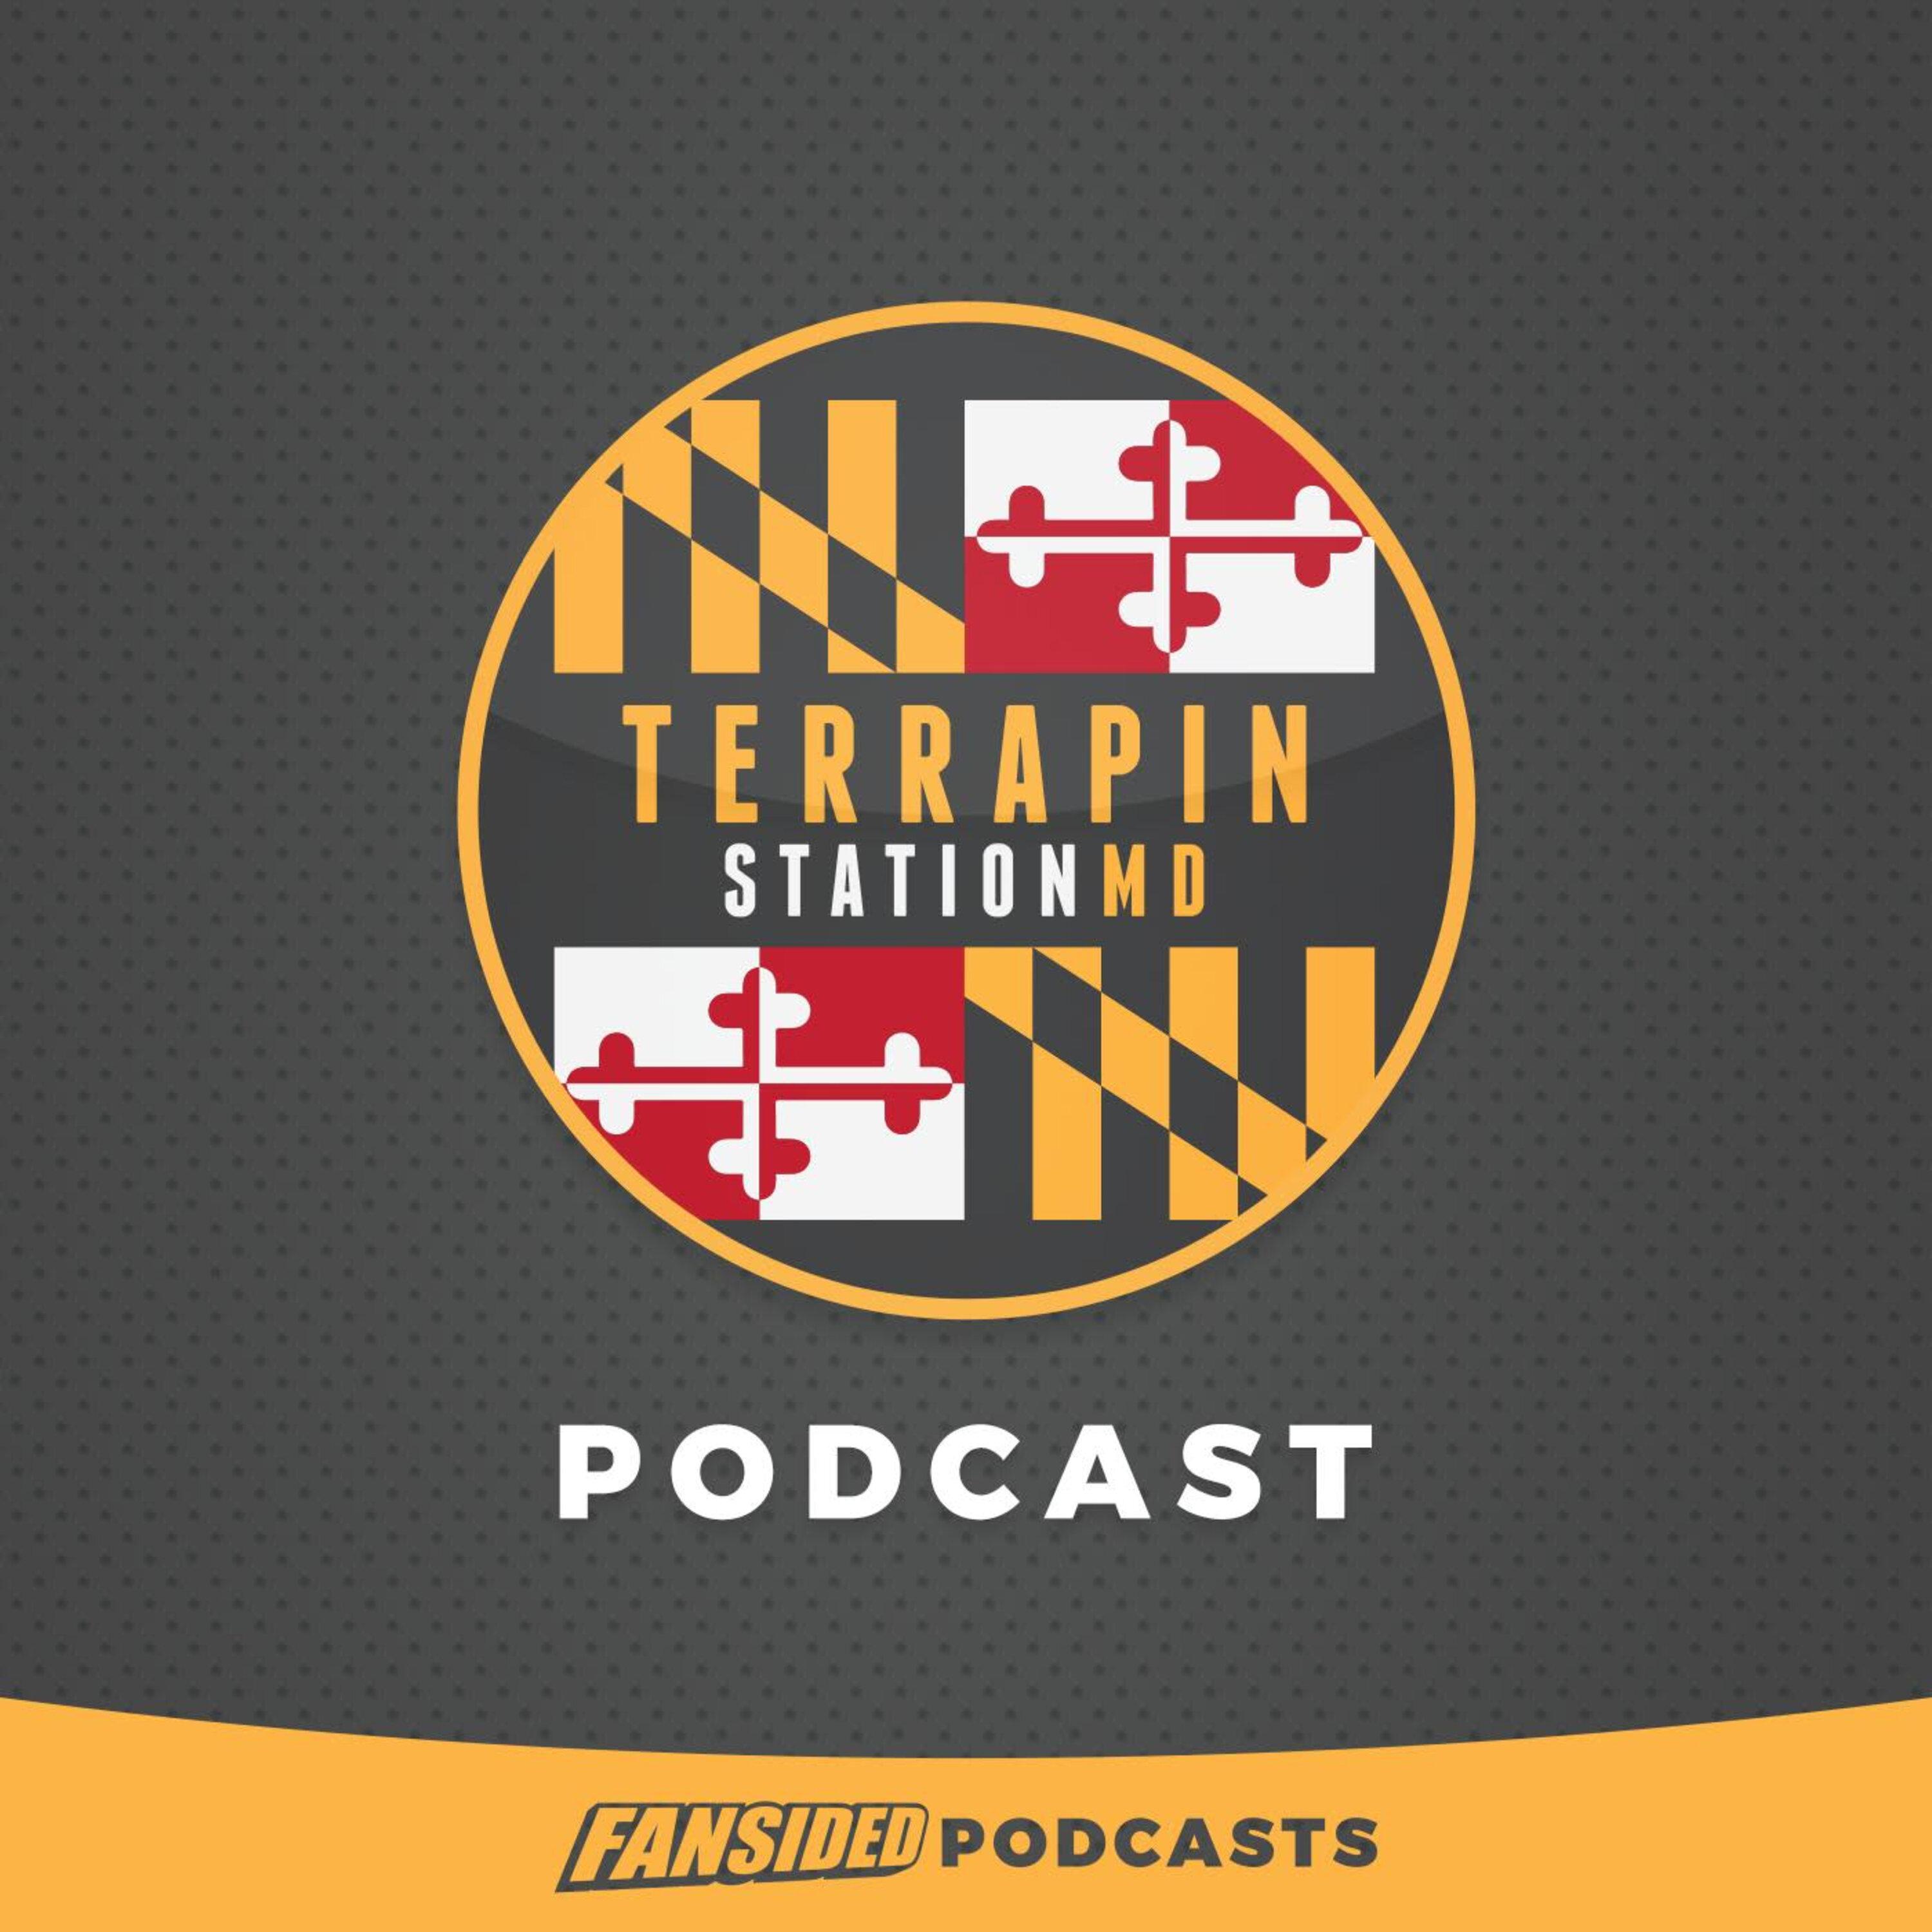 Terrapin Station, MD Podcast on the Maryland Terrapins